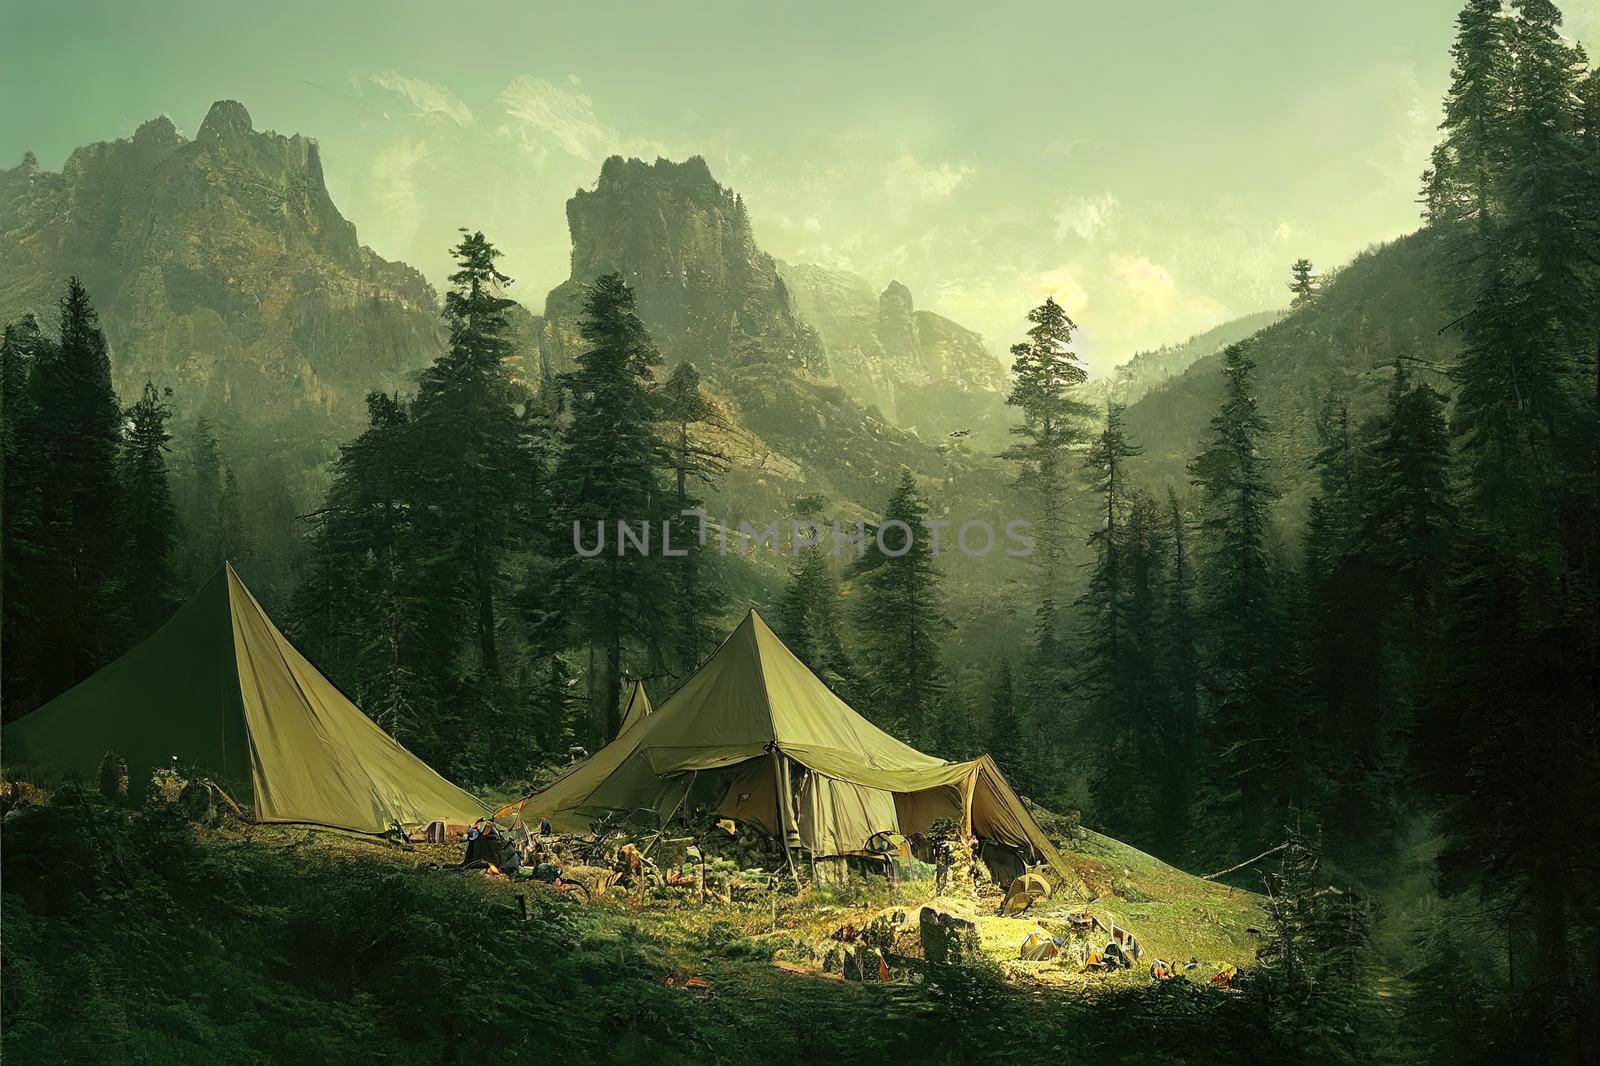 Camp in the mountains among the green hills. The camp is in the woods. Camp in the woods at the edge of mountains. Mountain forest camping. High quality illustration